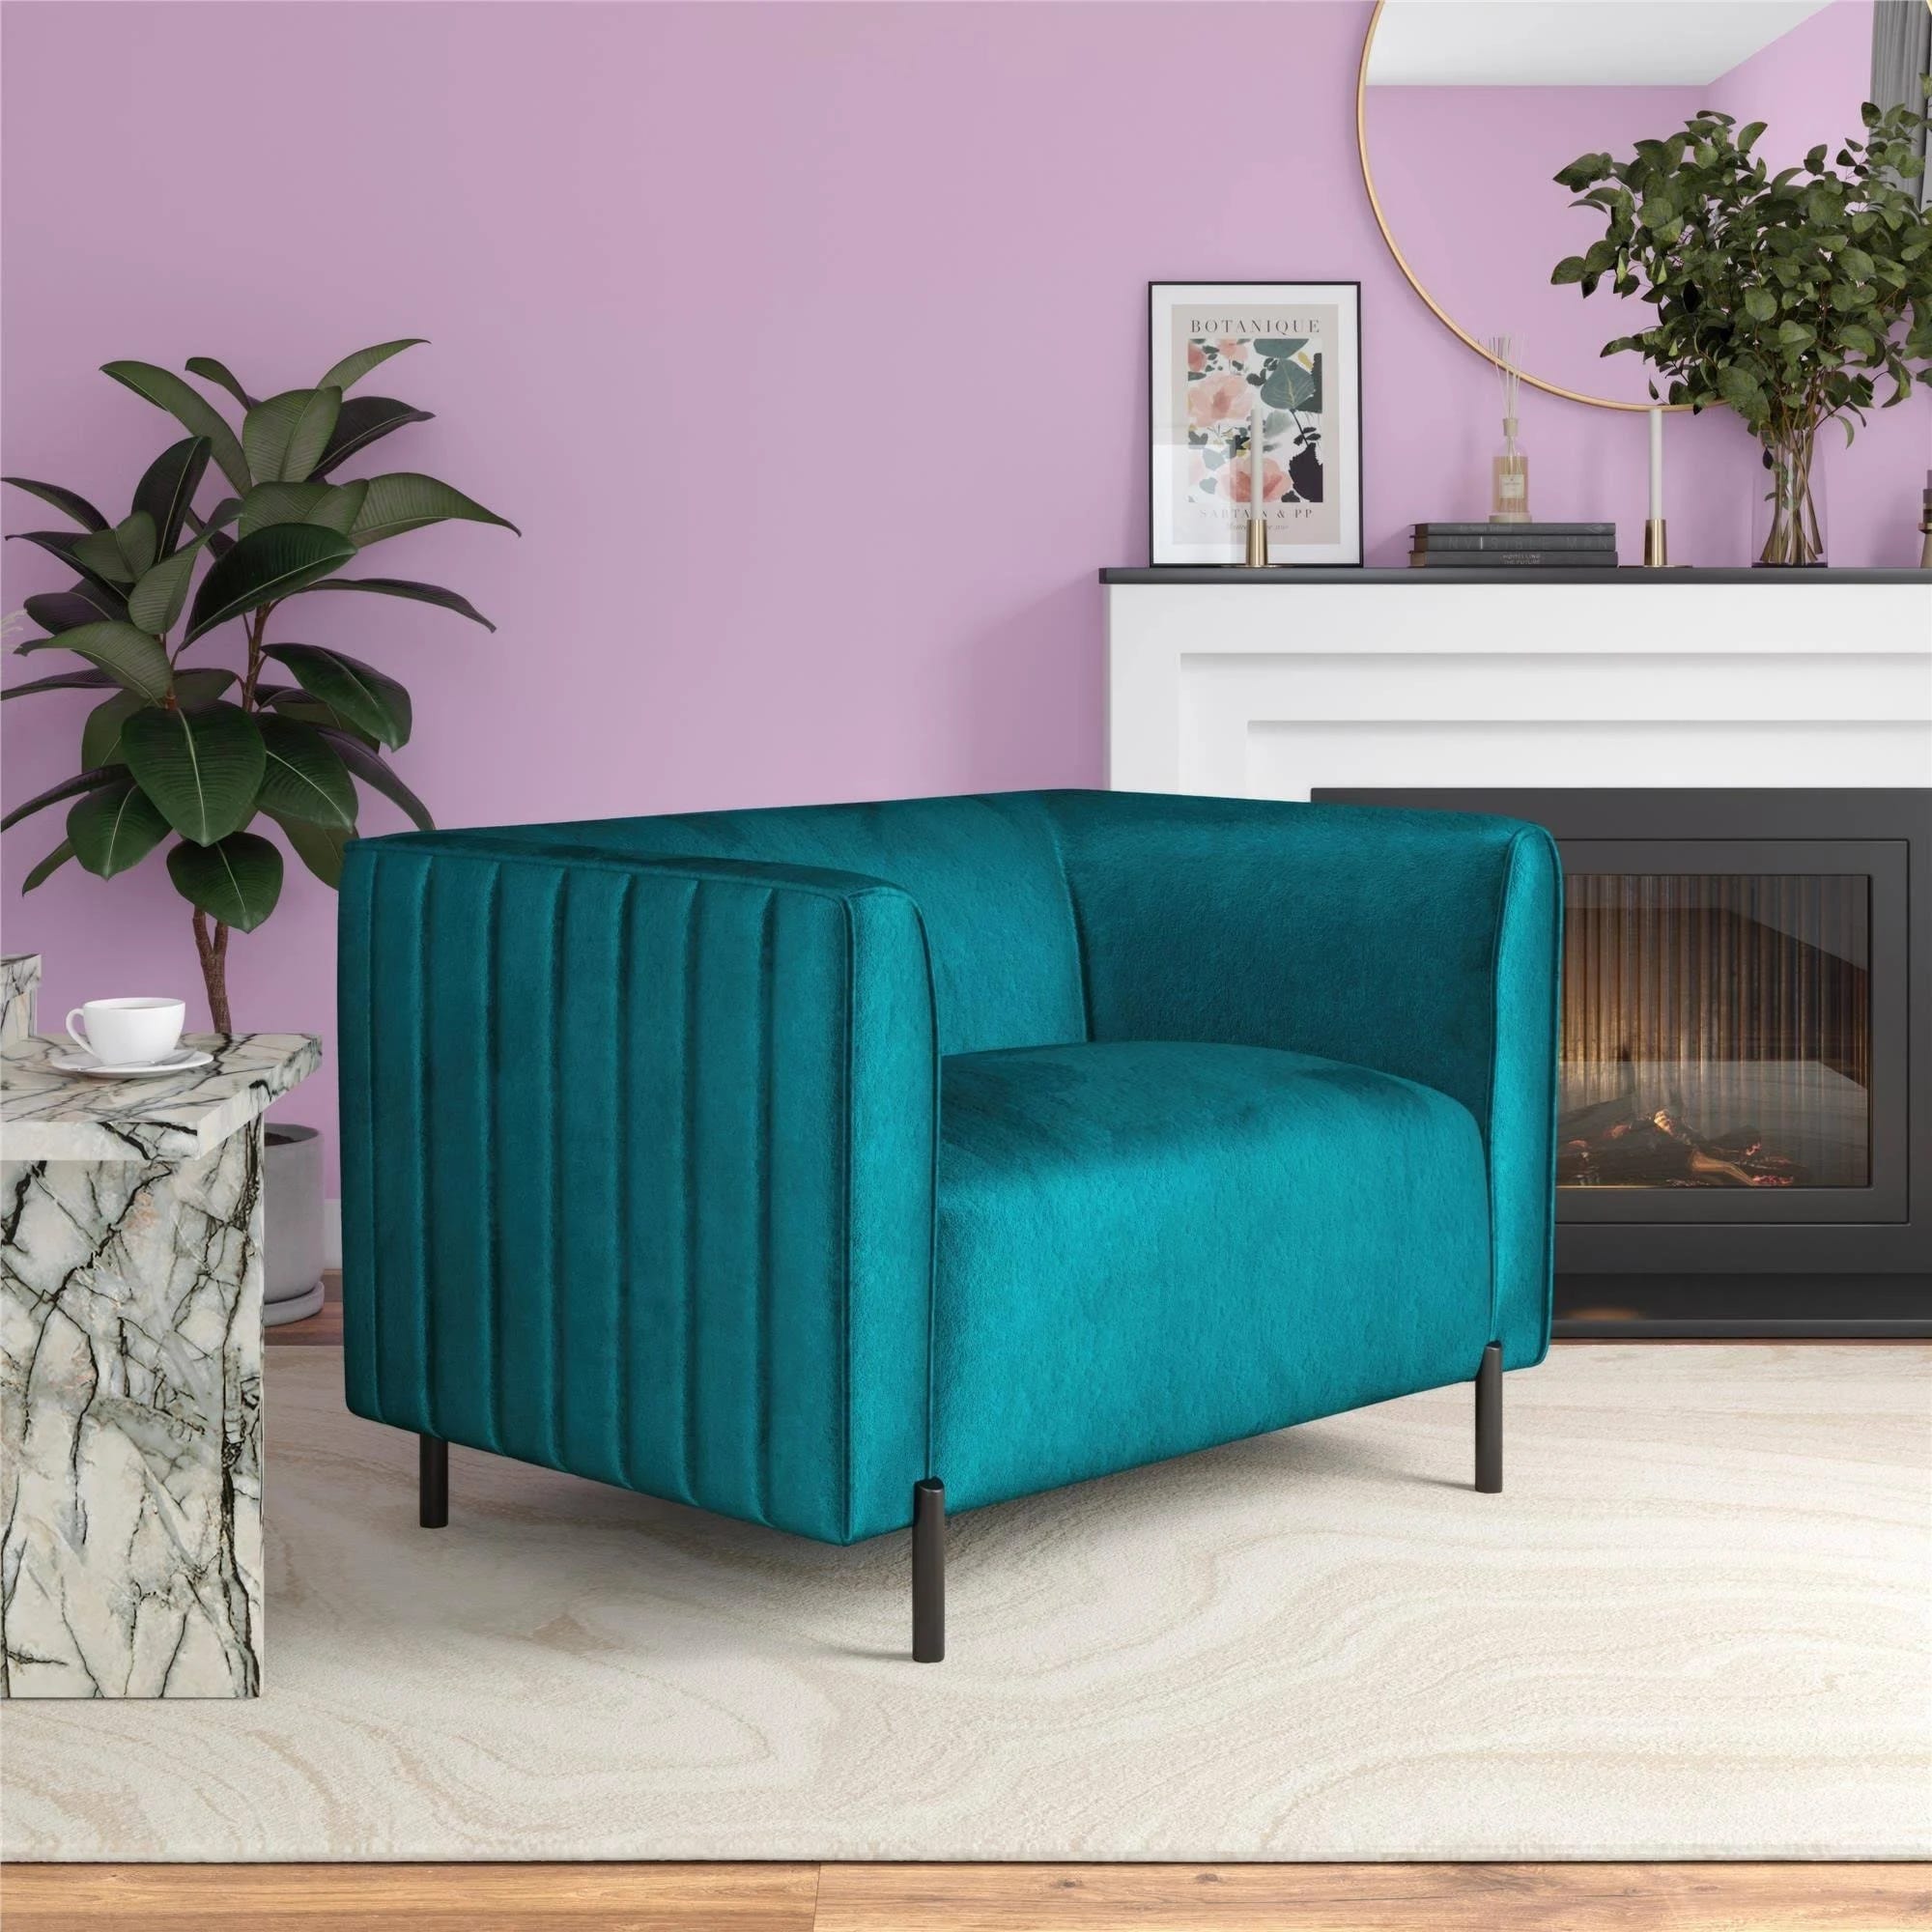 CosmoLiving Emerald Green Accent Chair - Elegant and Comfortable | Image